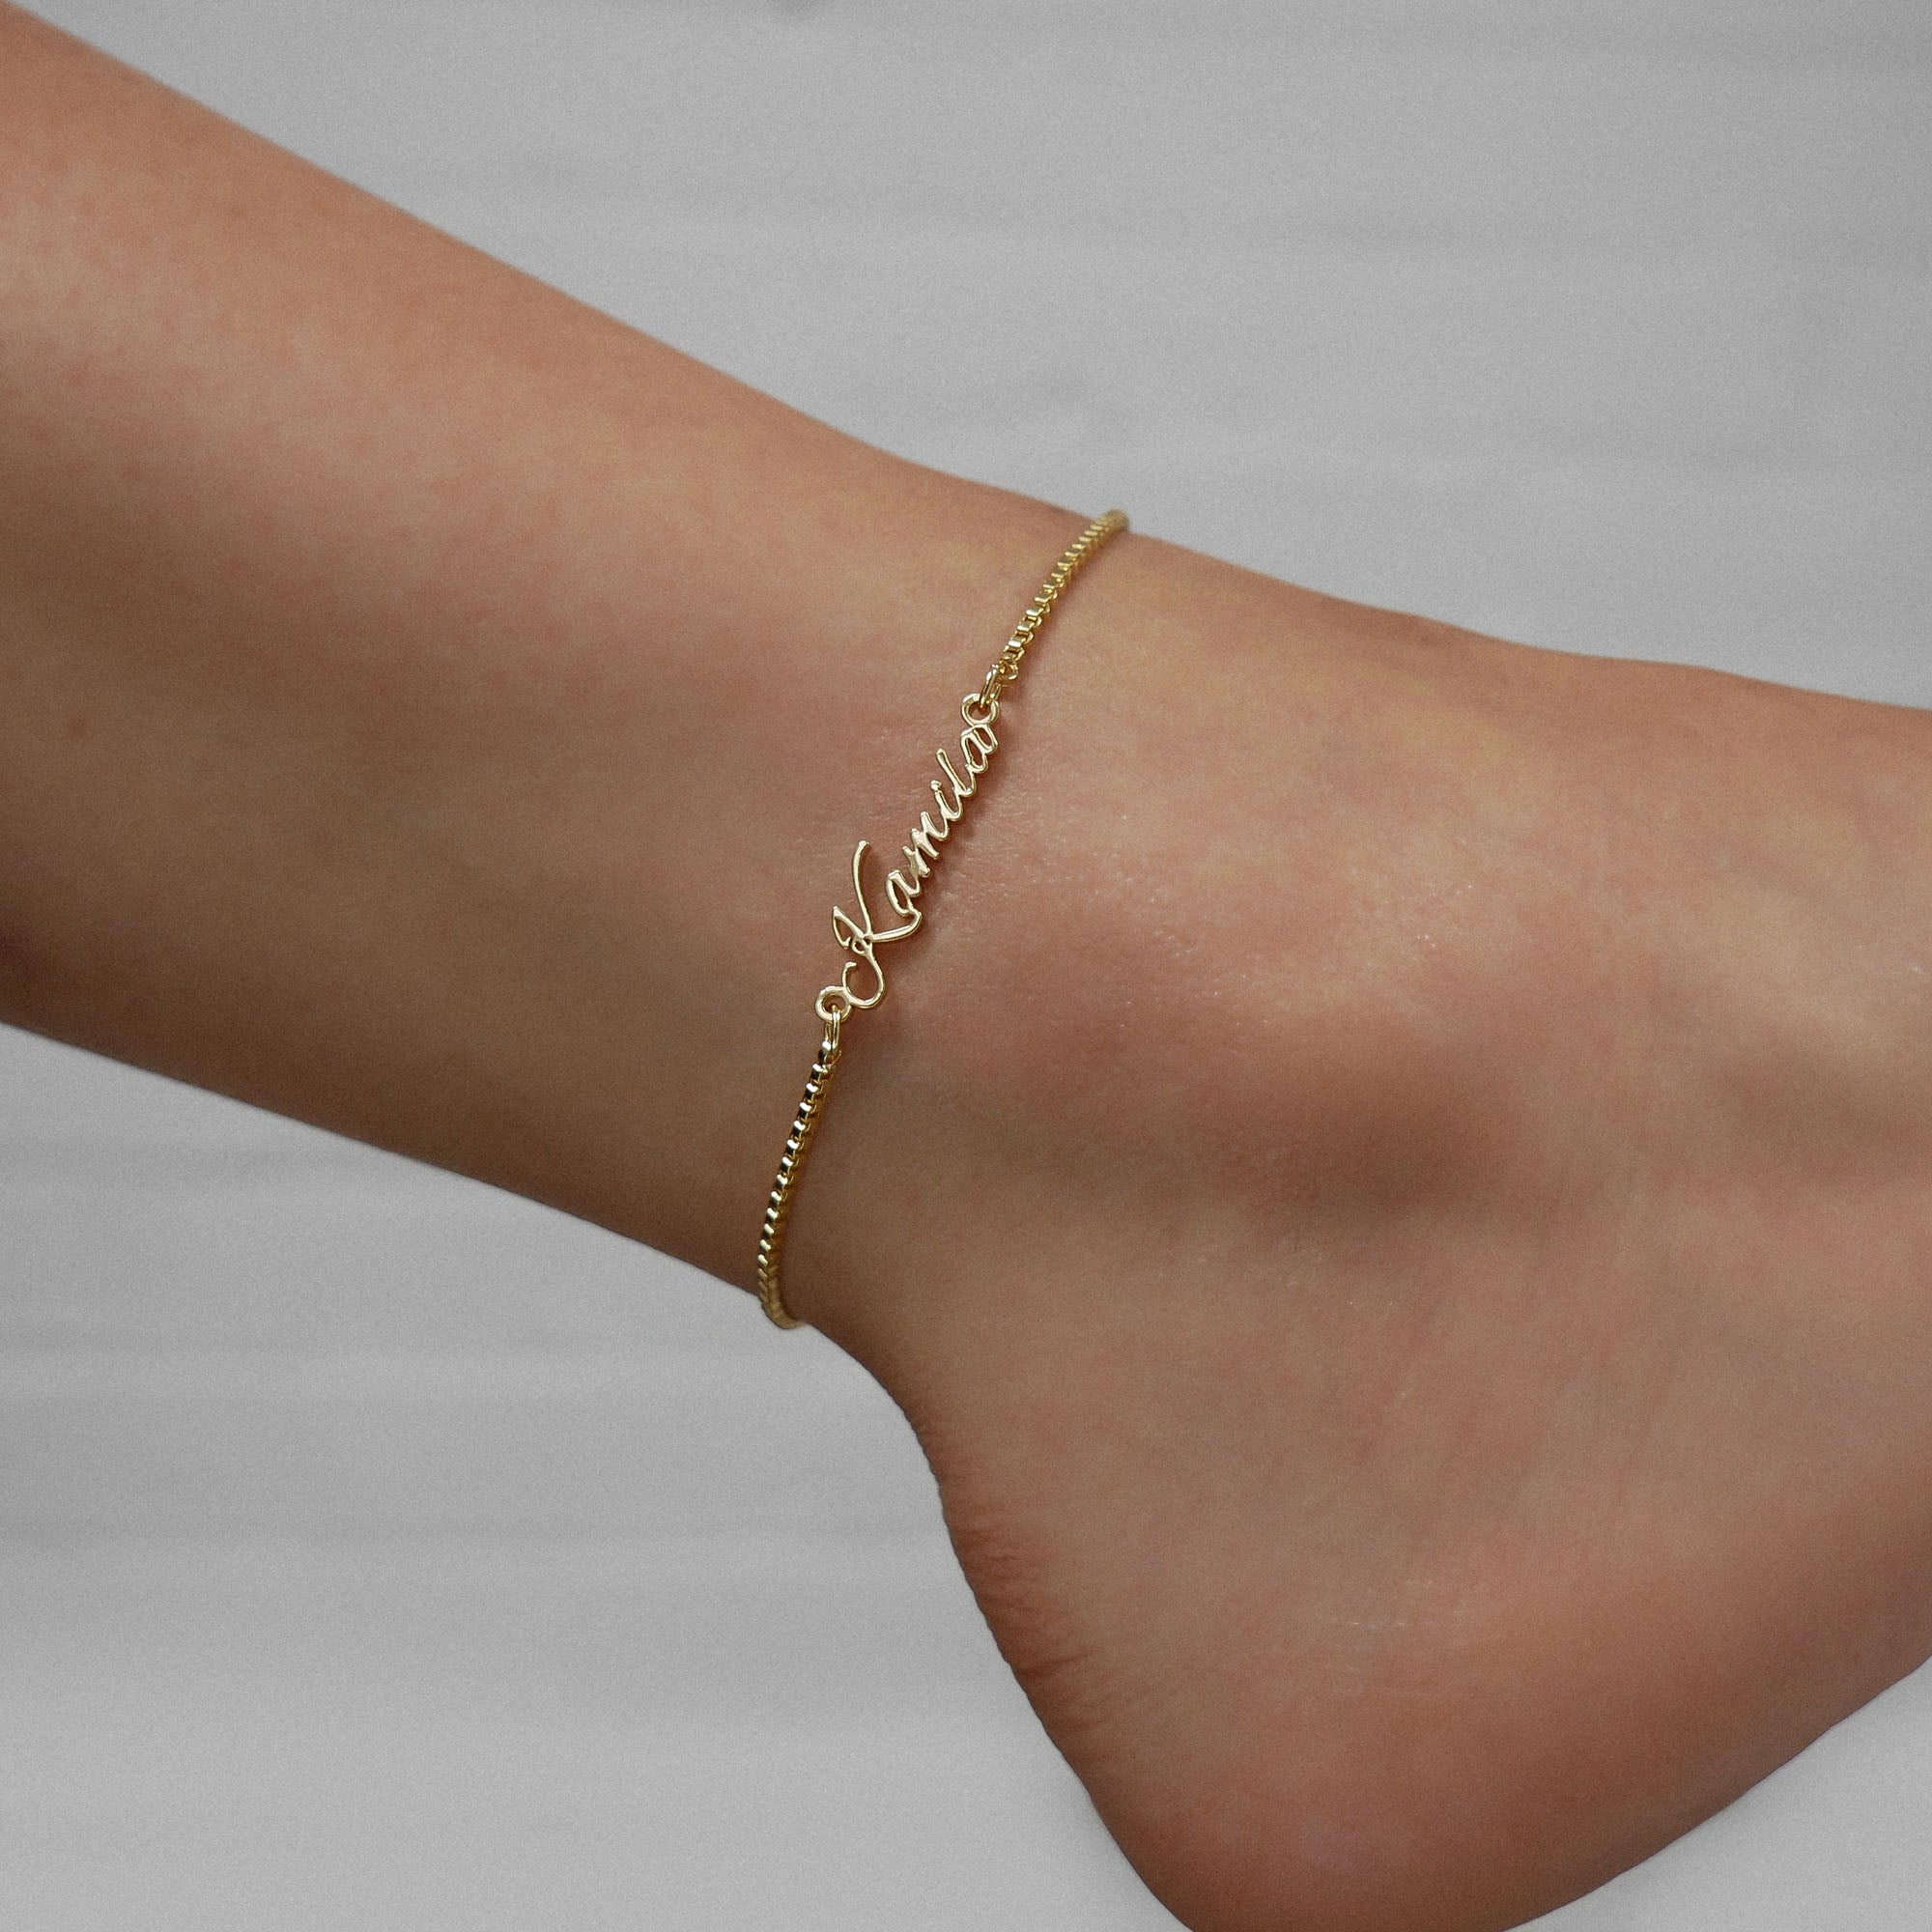 Gold Venice custom name anklet photographed on an ankle